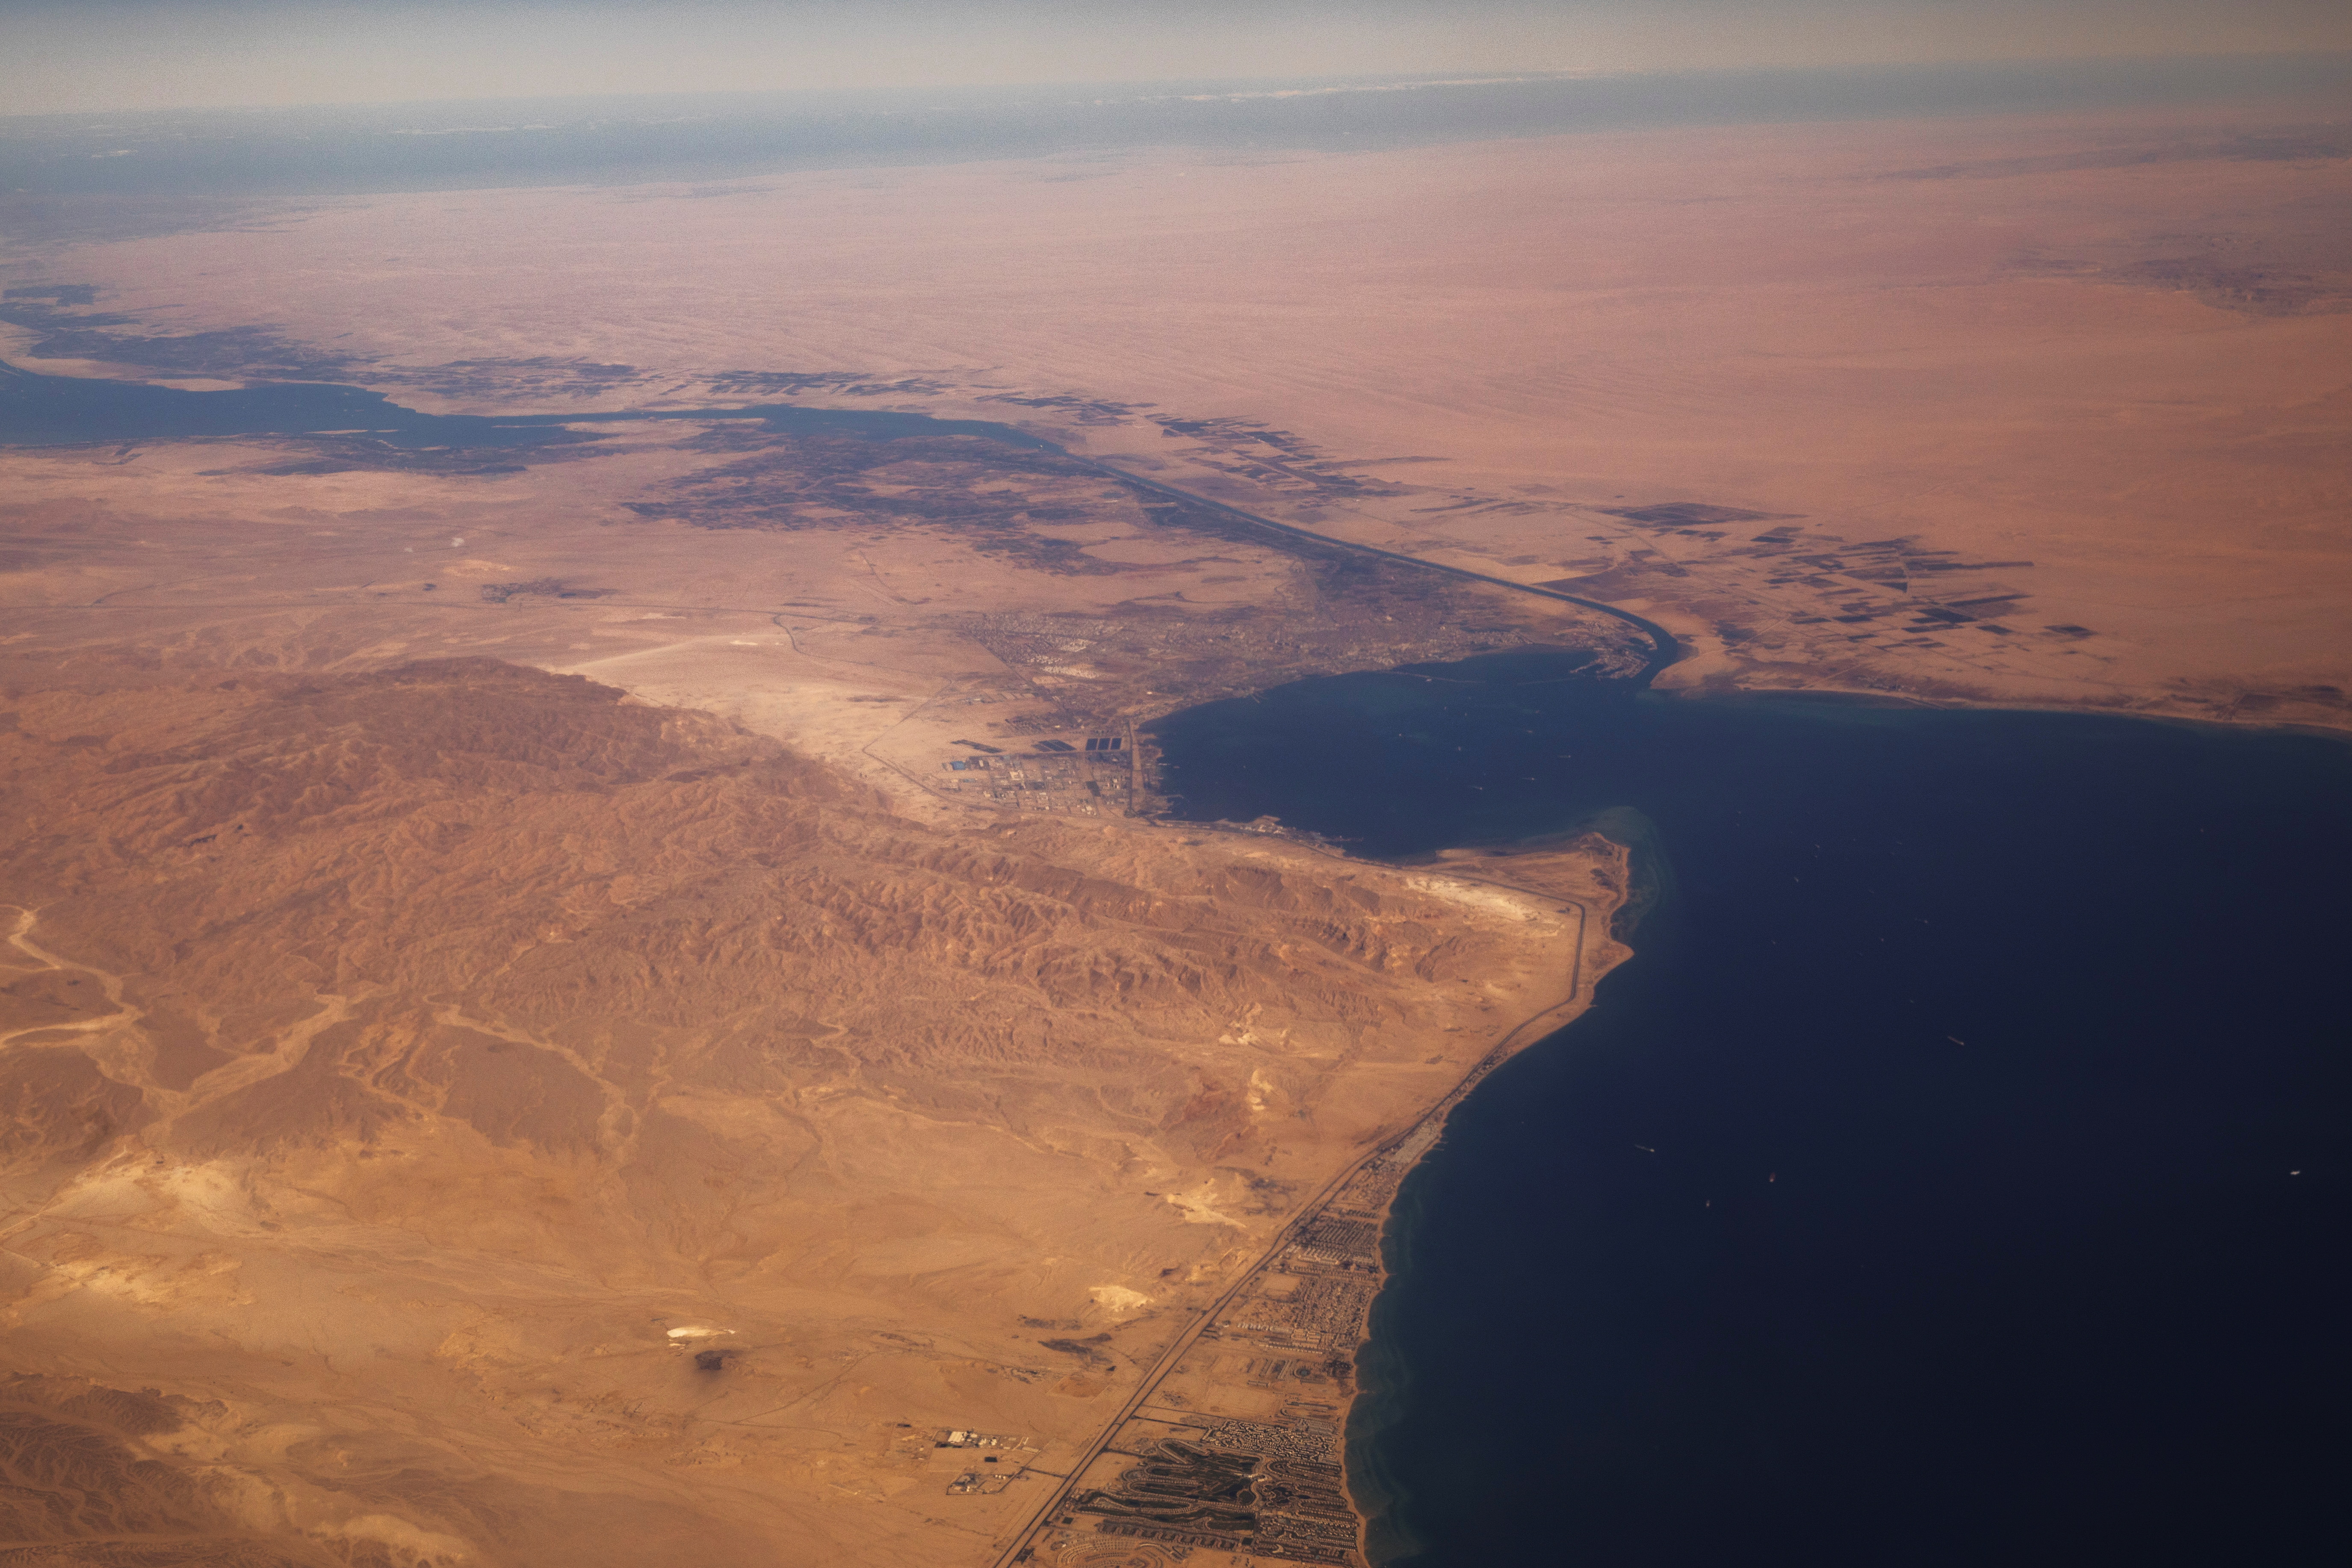 The Suez Canal connecting the Mediterranean Sea to the Red Sea is pictured from the window of a commercial plane flying over Egypt